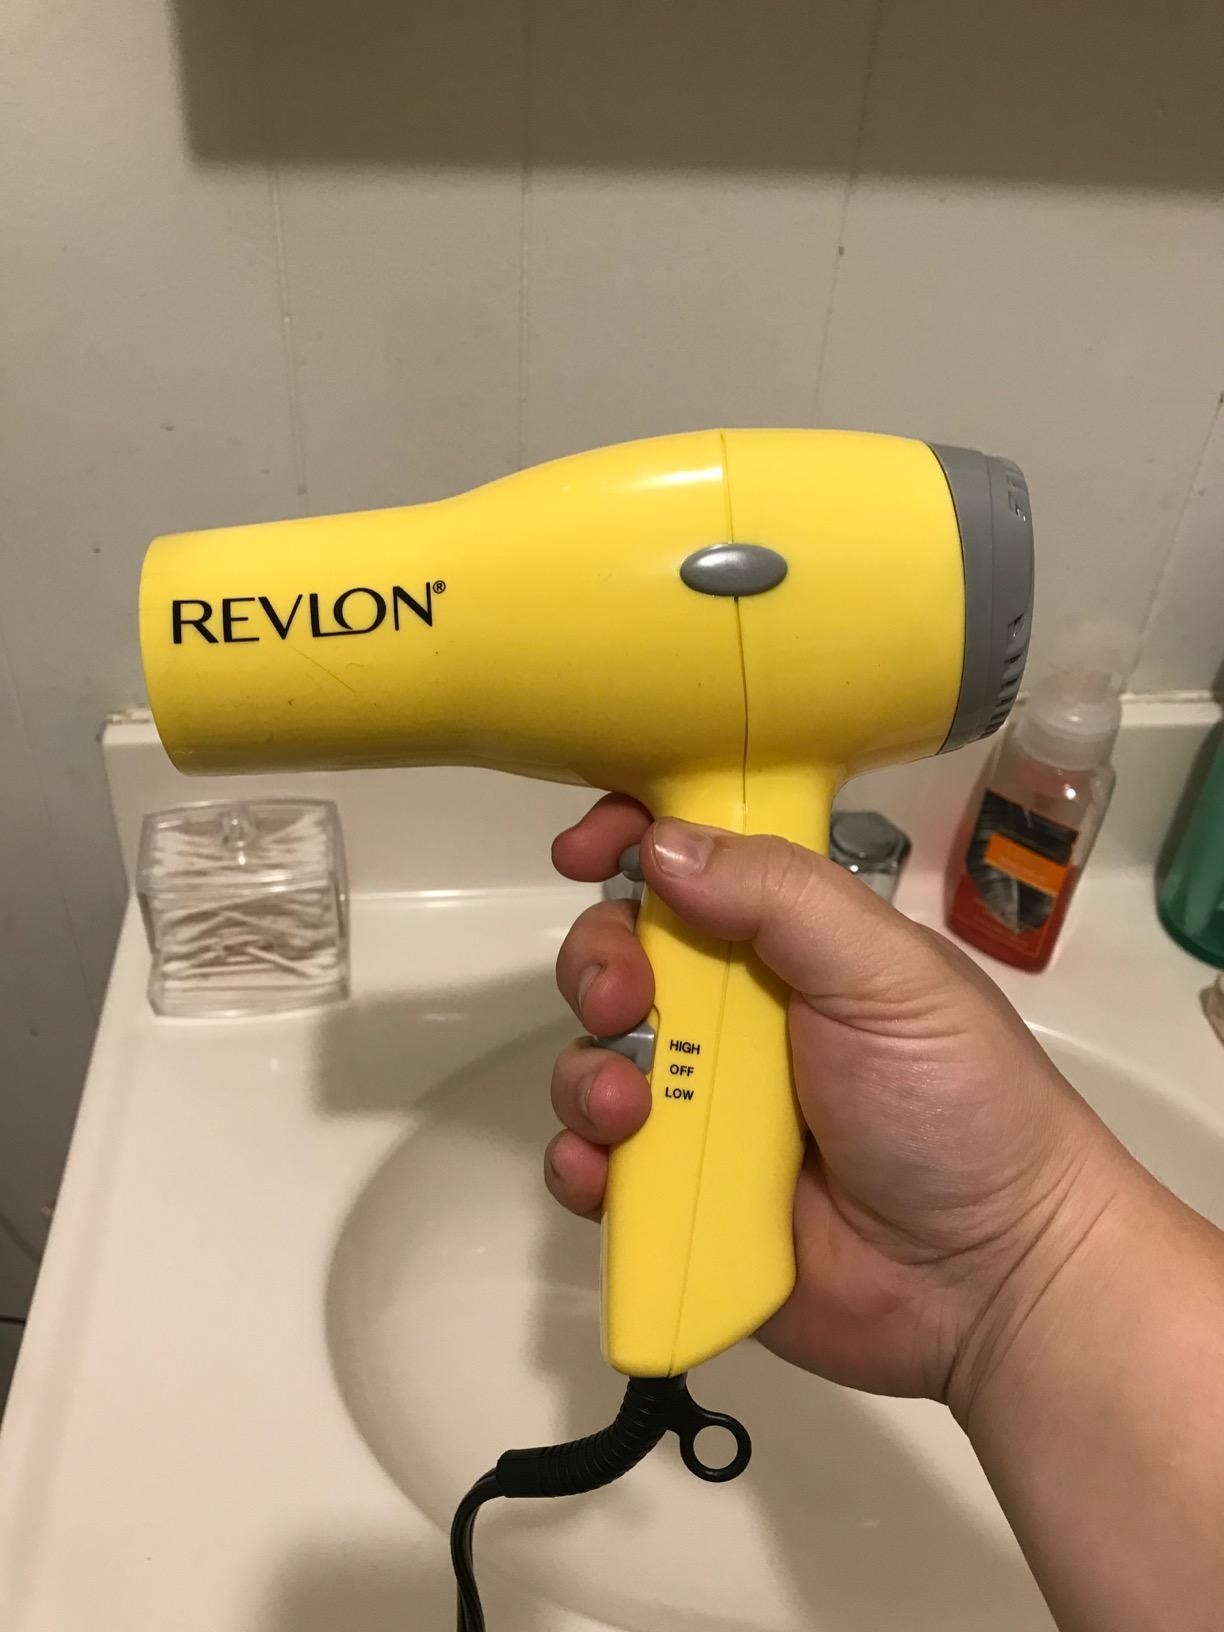 Reviewer holding the yellow Revlon hair dryer